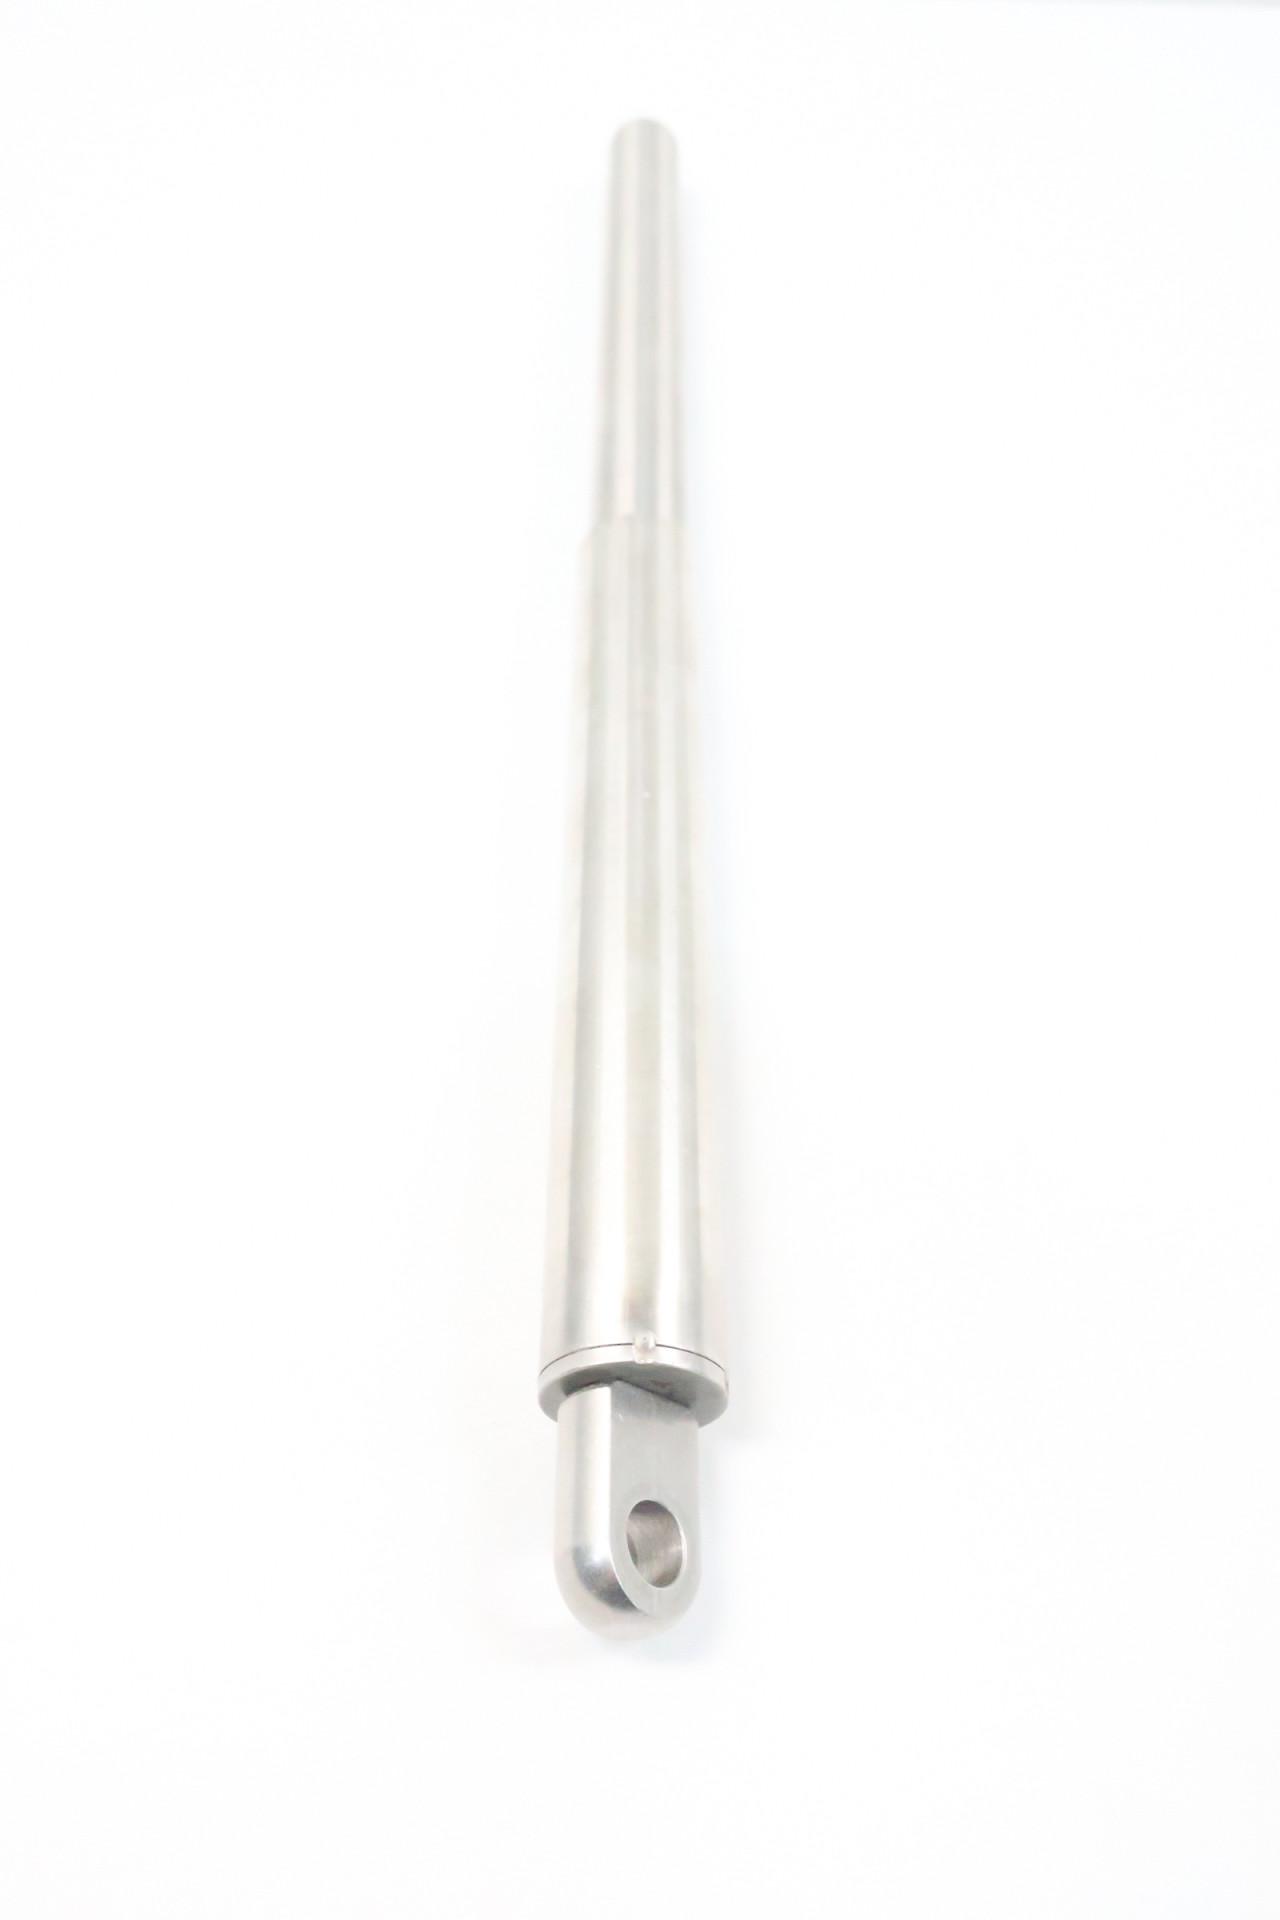 AMERITOOL GAS SPRING 875-4-100# STAINLESS STEEL NEW FREE SHIPPING 